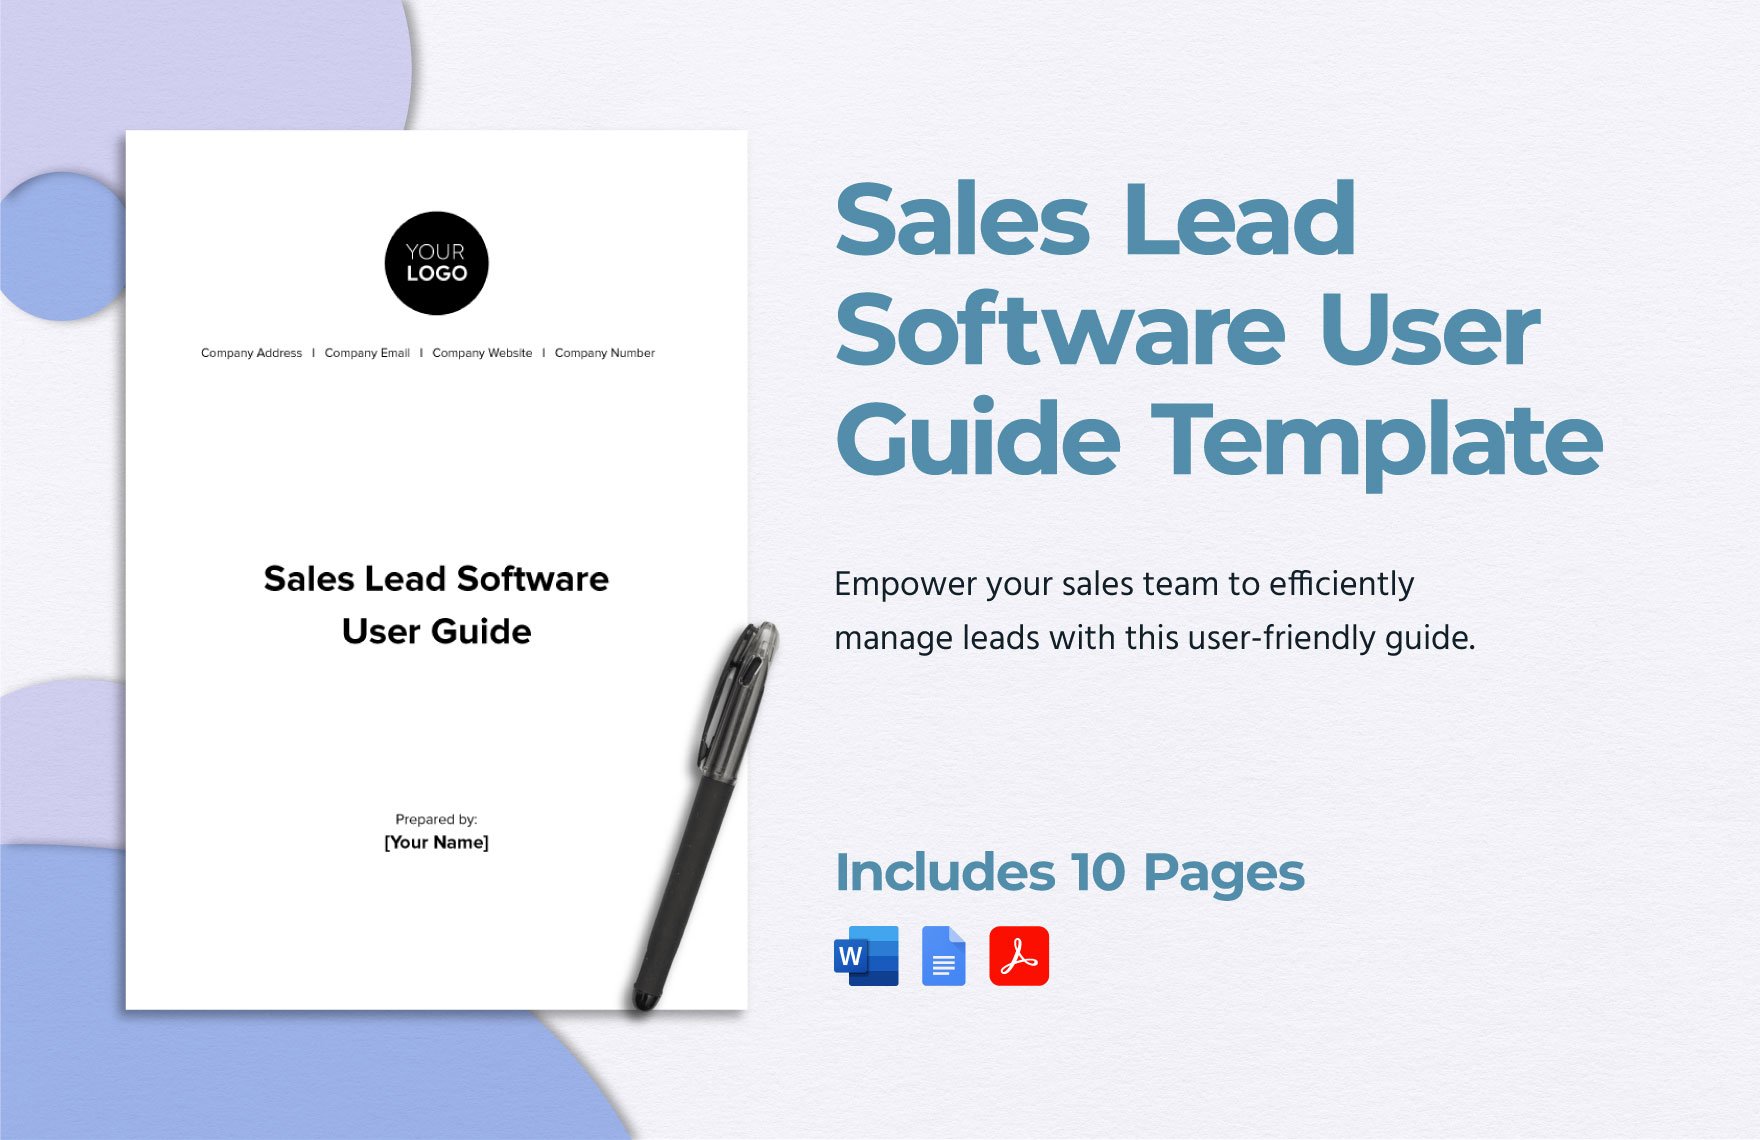 Sales Lead Software User Guide Template in Word, Google Docs, PDF